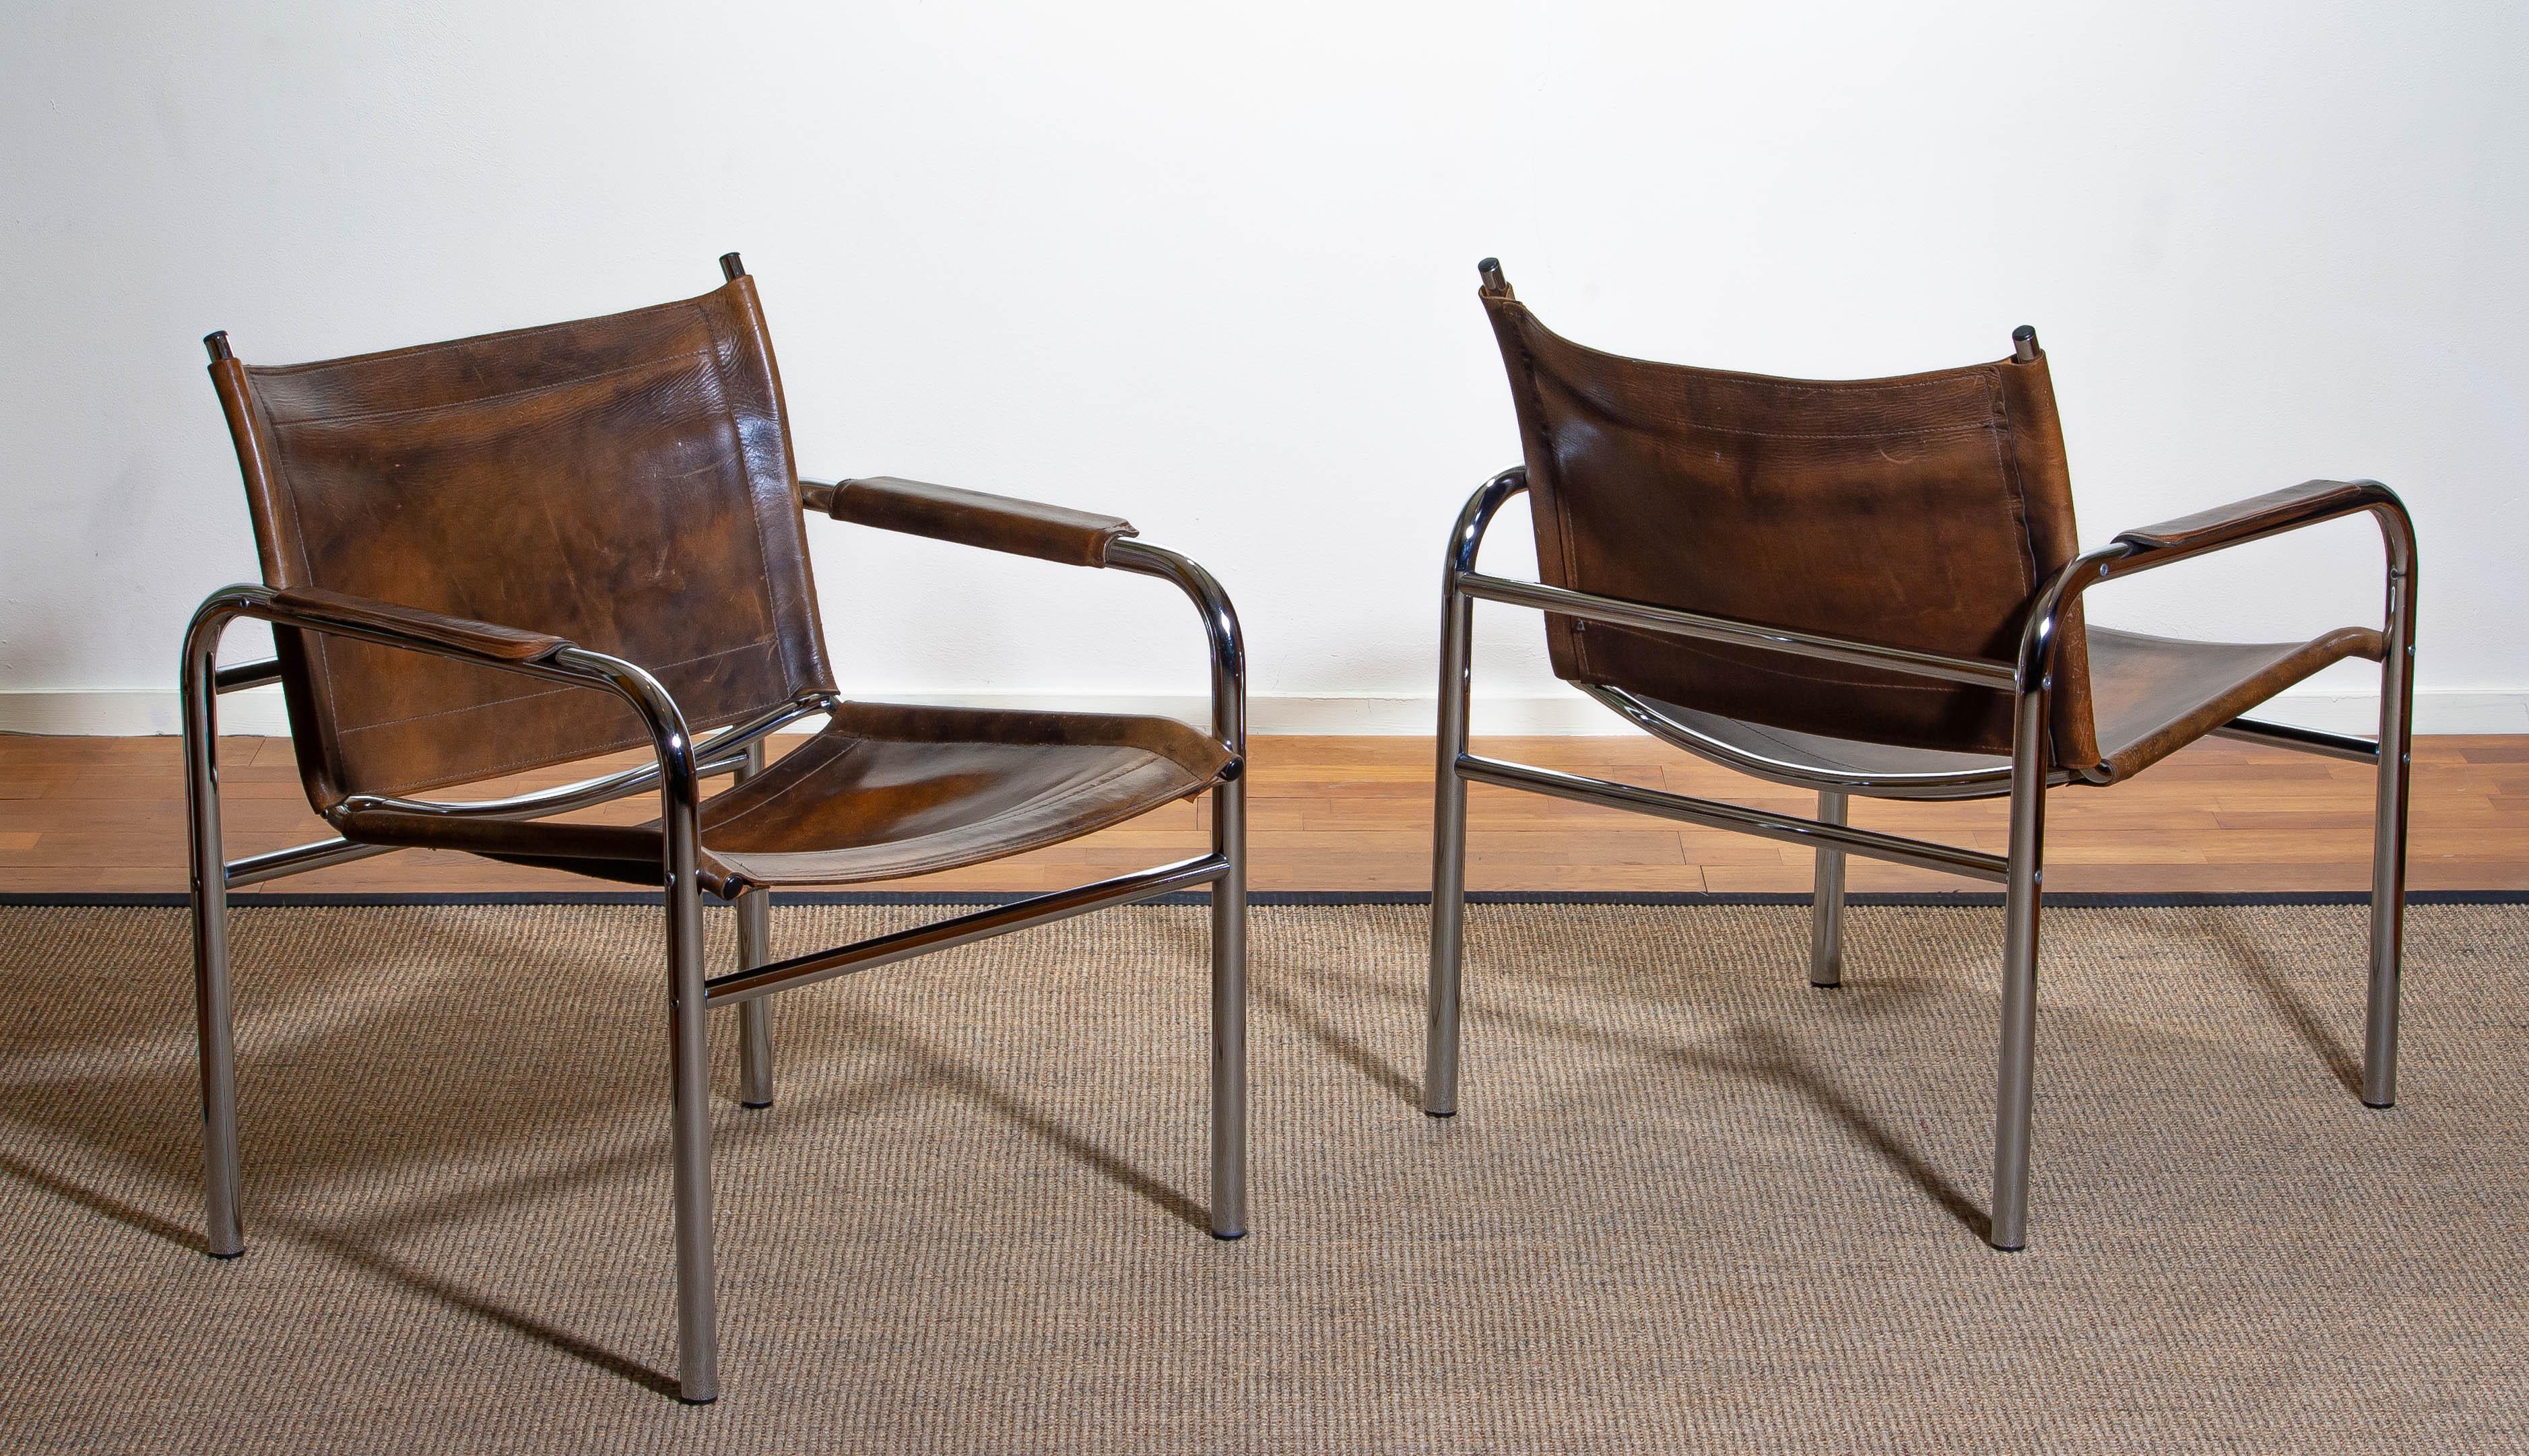 1980s, Pair of Leather and Tubular Steel Armchairs by Tord Bjorklund, Sweden 1